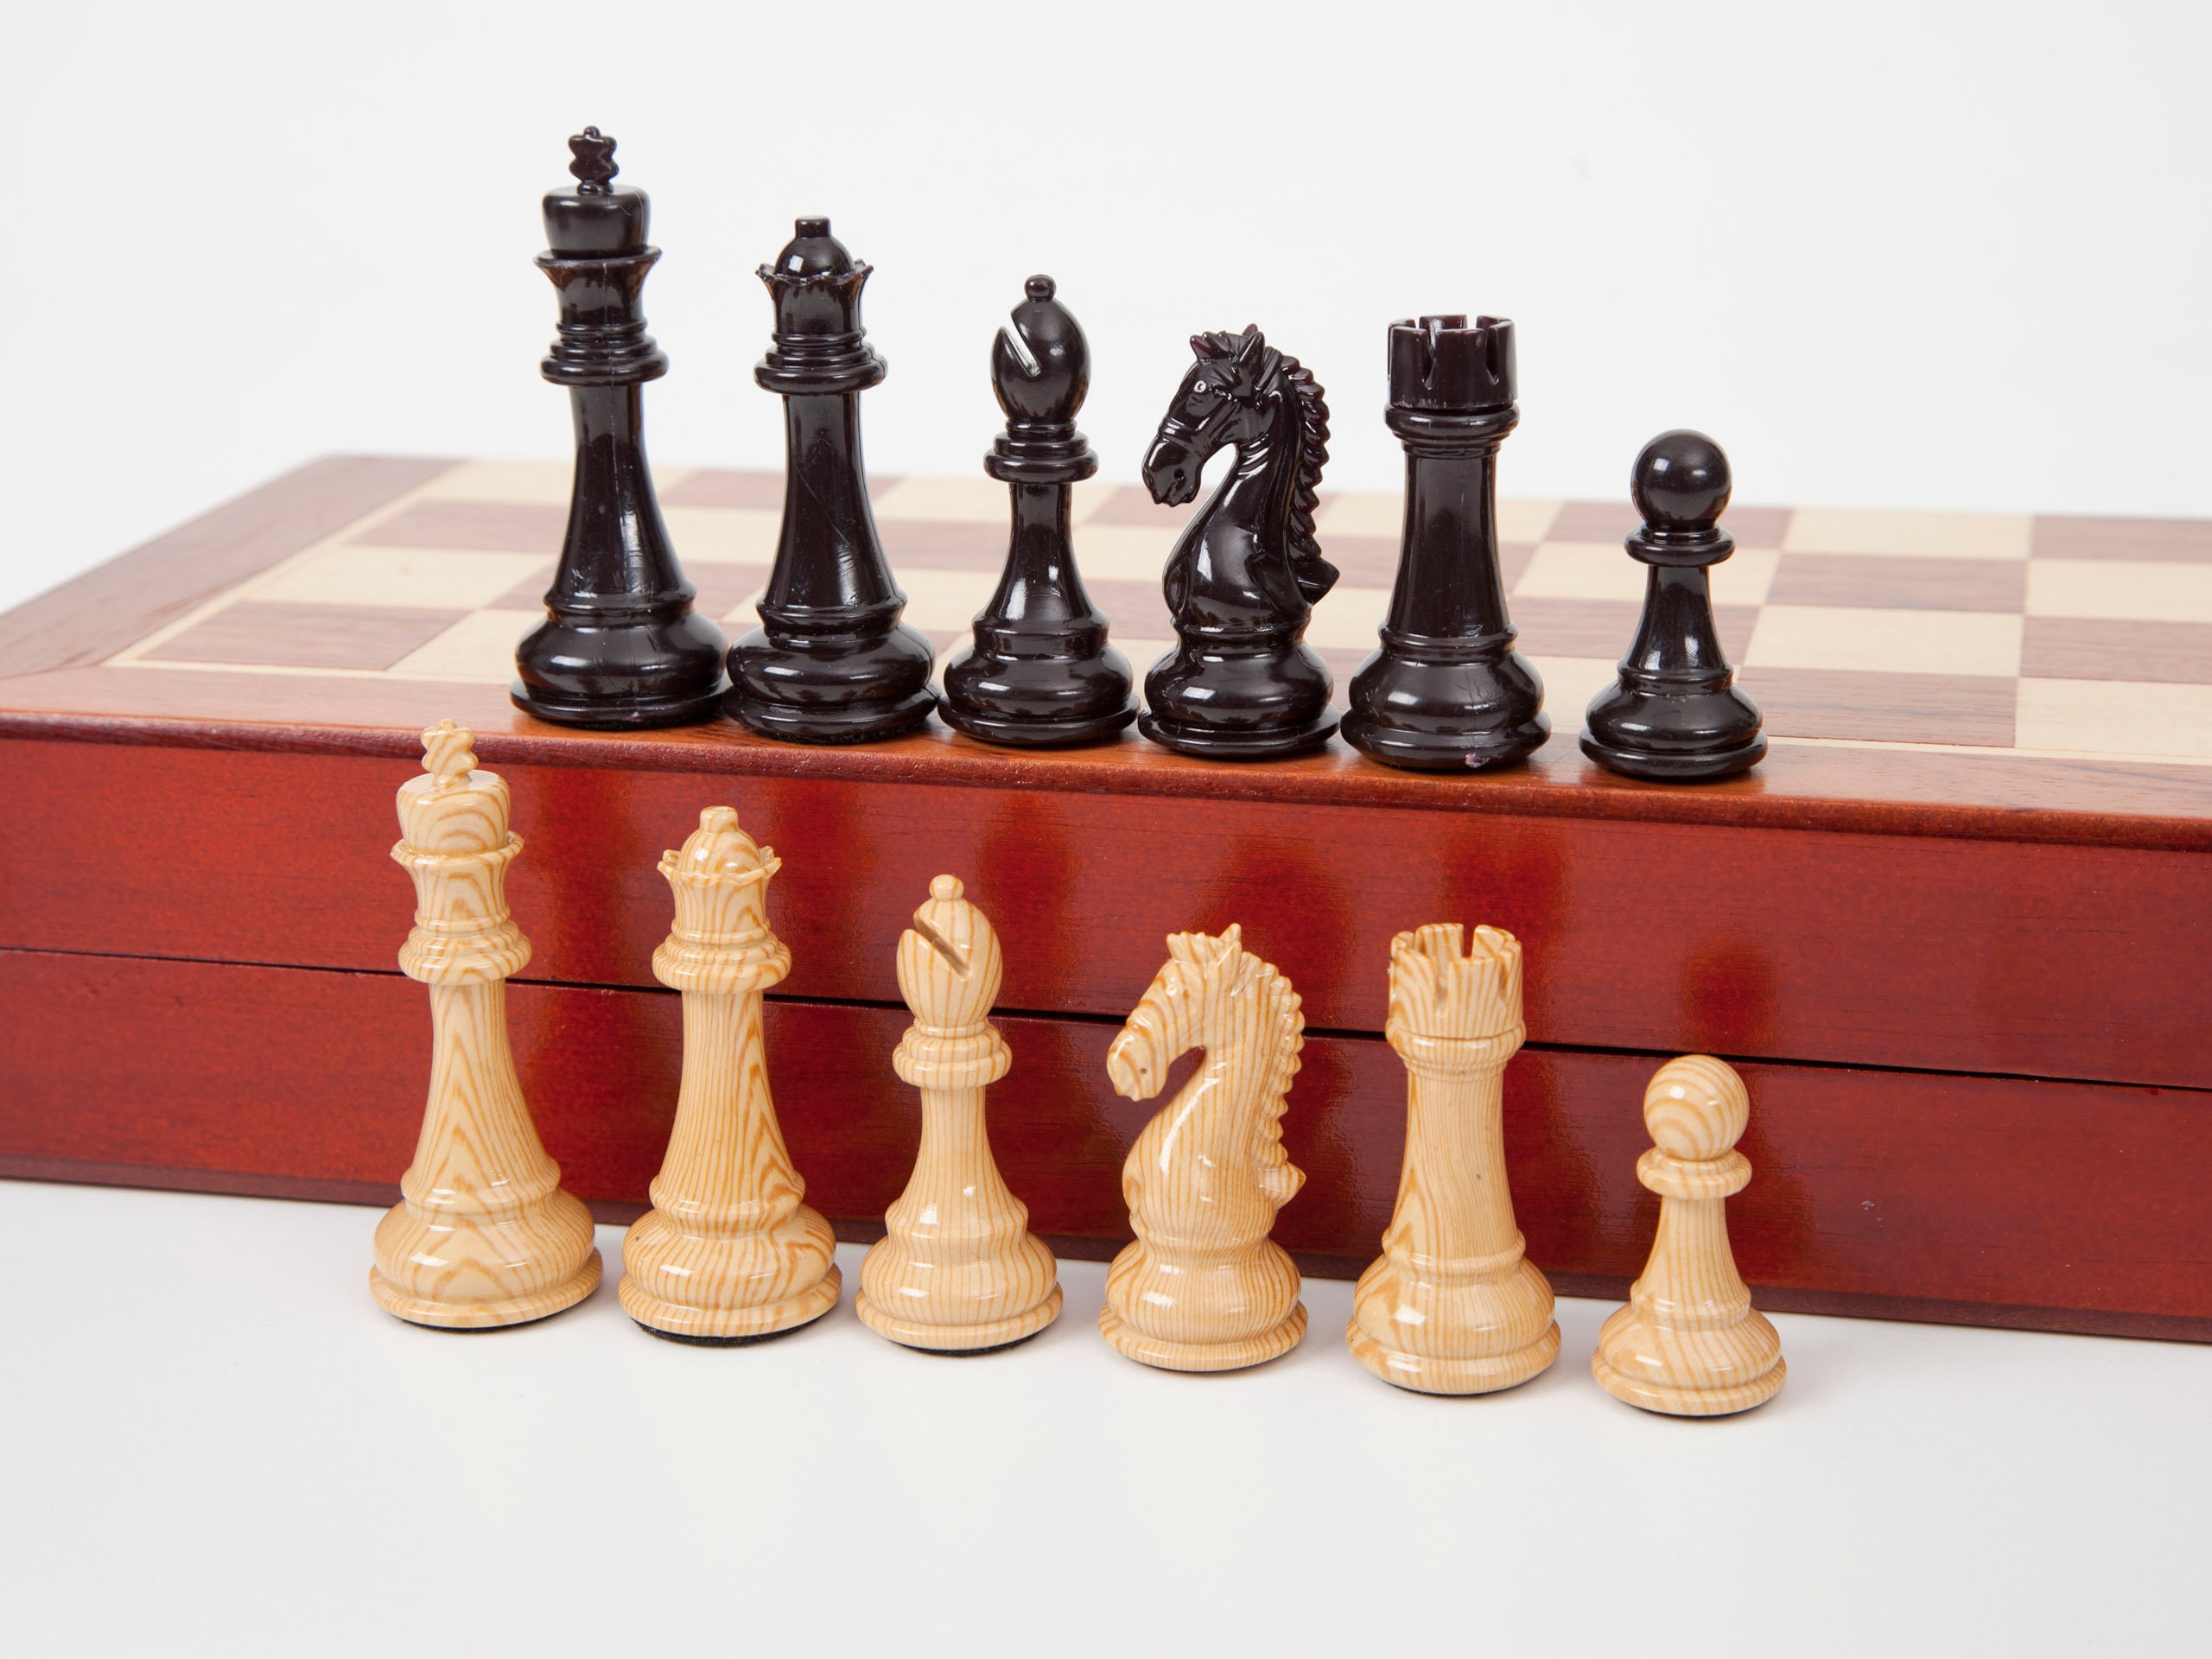 WE Games Round Wooden Travel Chess Set with Pegged Chessmen – 6 inches